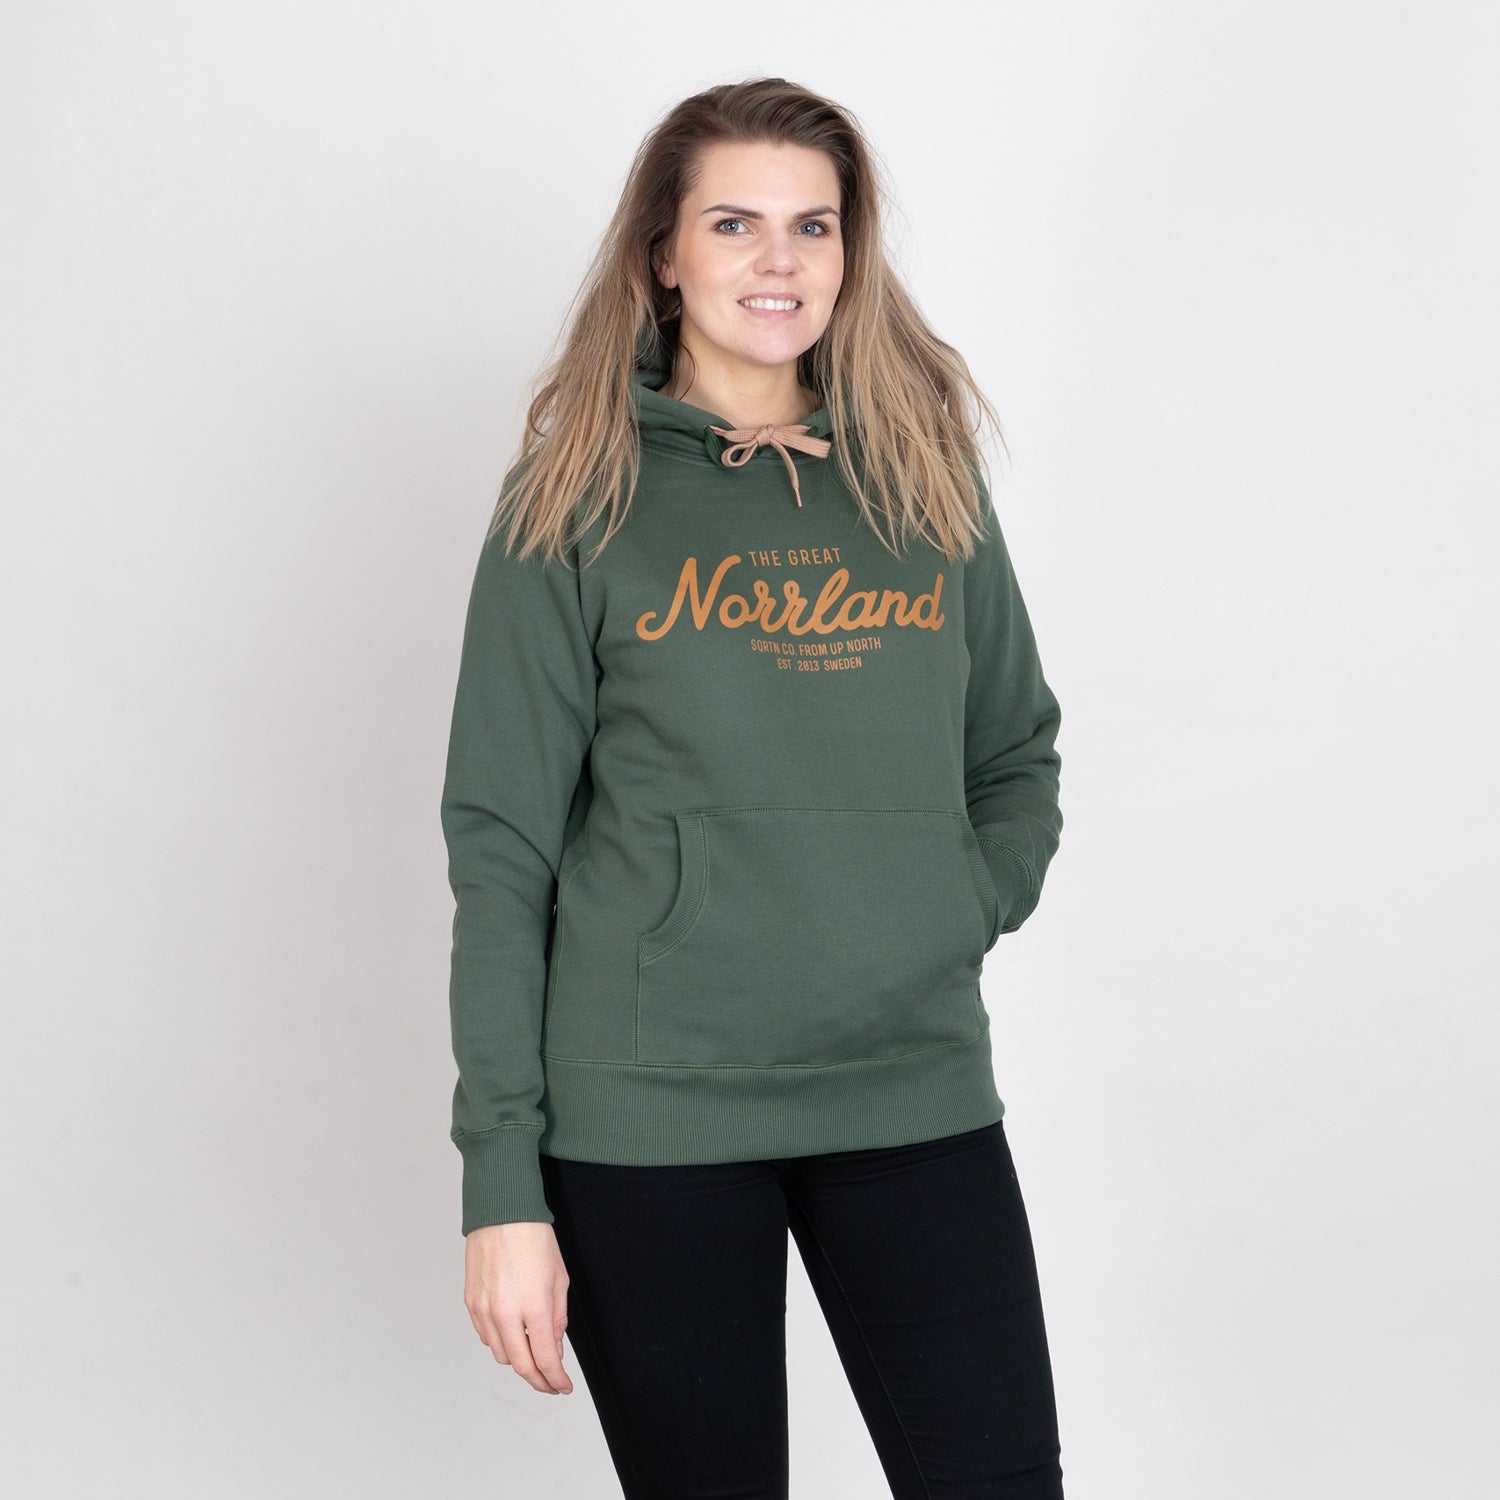 GREAT NORRLAND HOODIE - STONE OLIVE